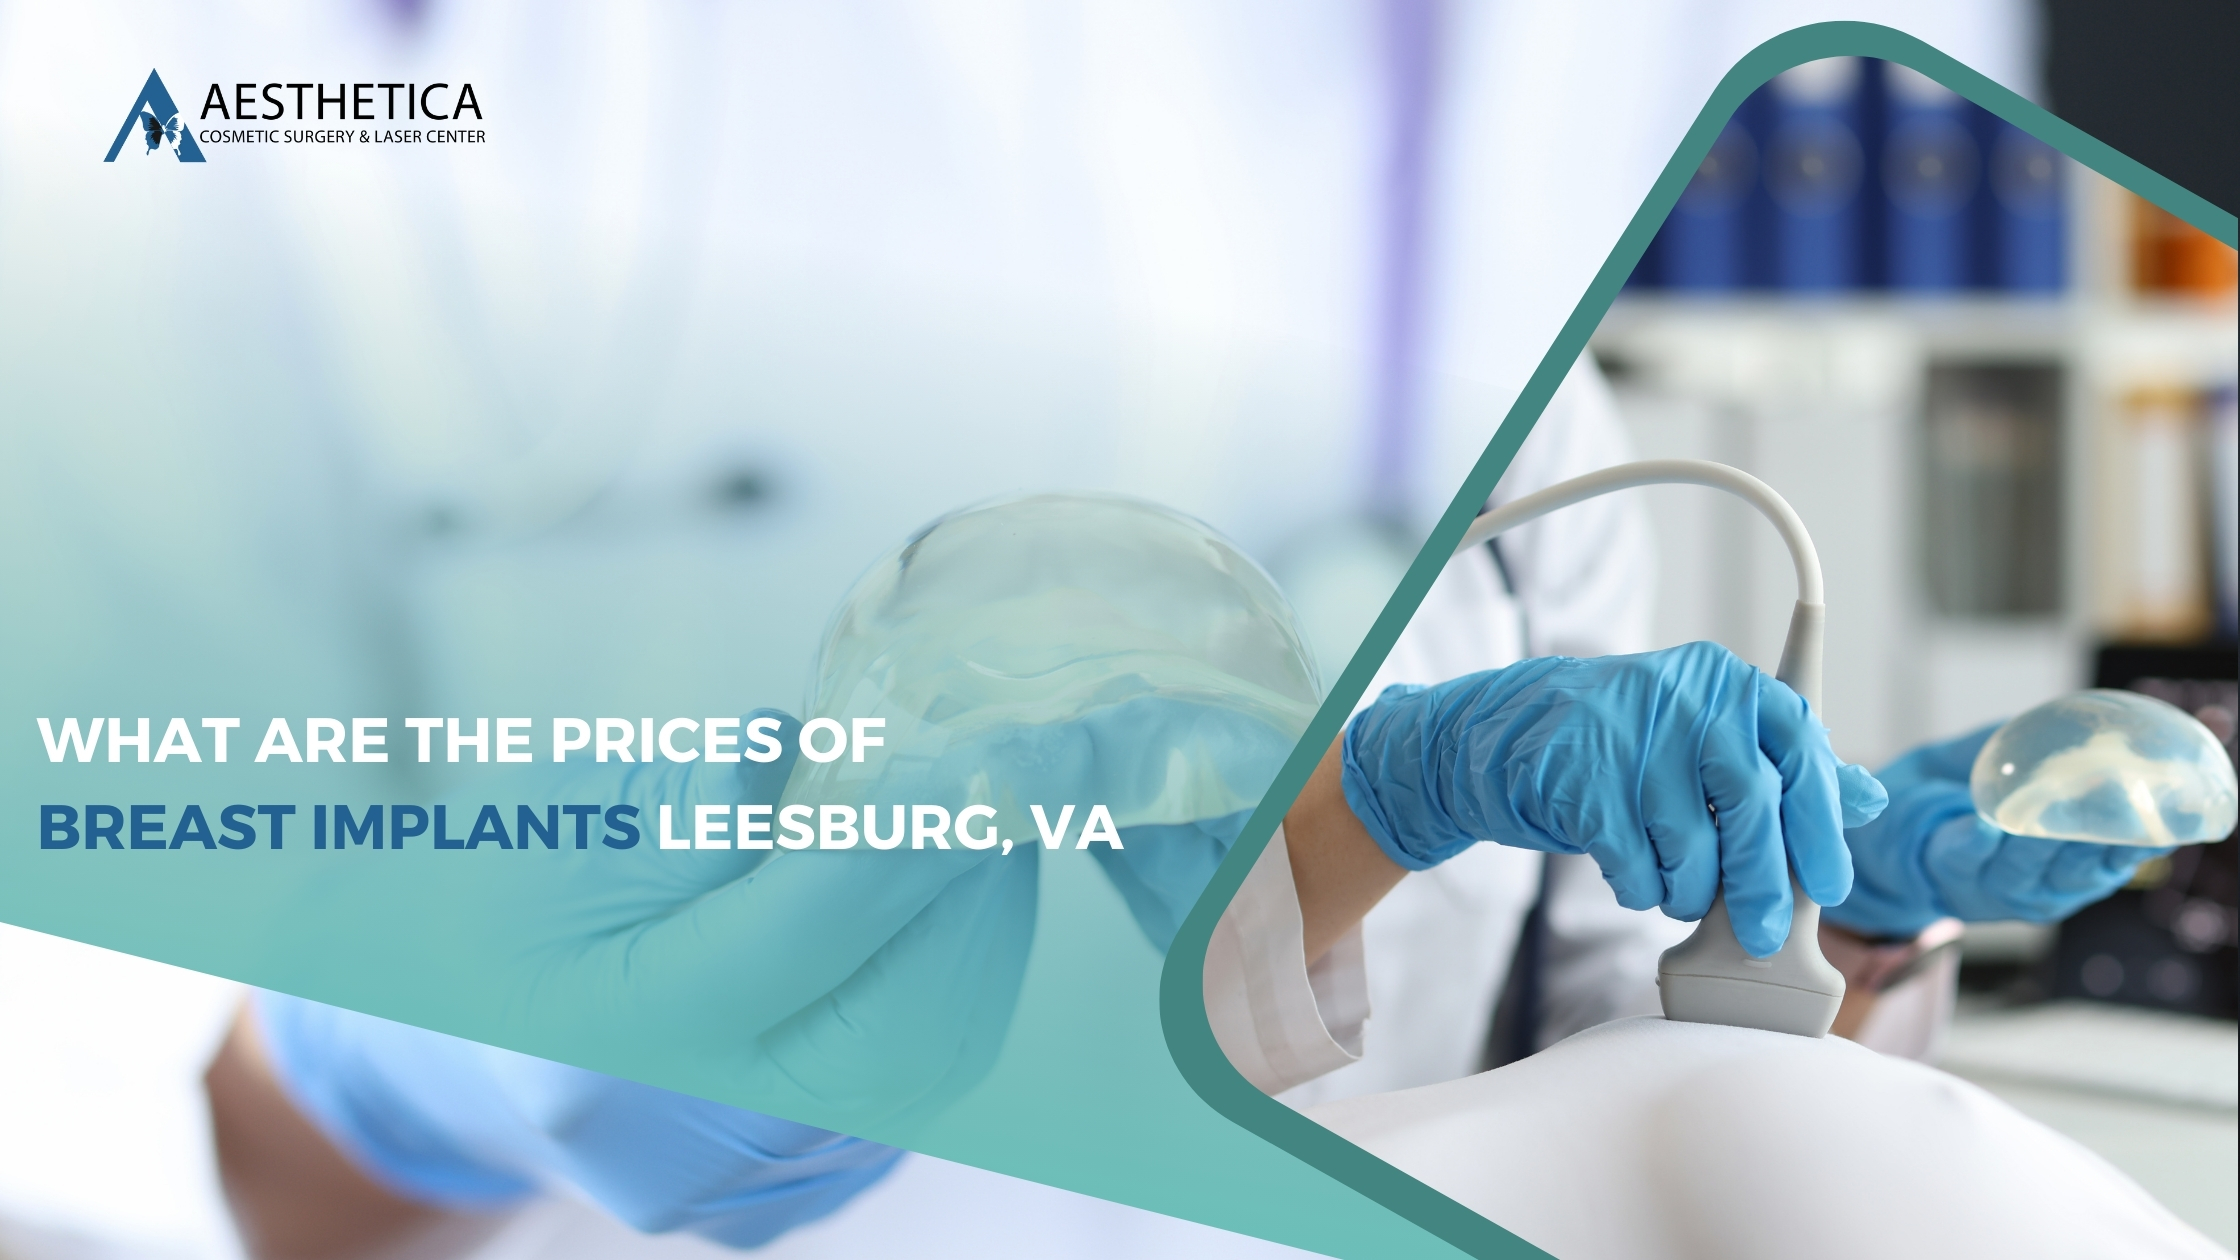 What Are the Prices of Breast Implants Leesburg, VA